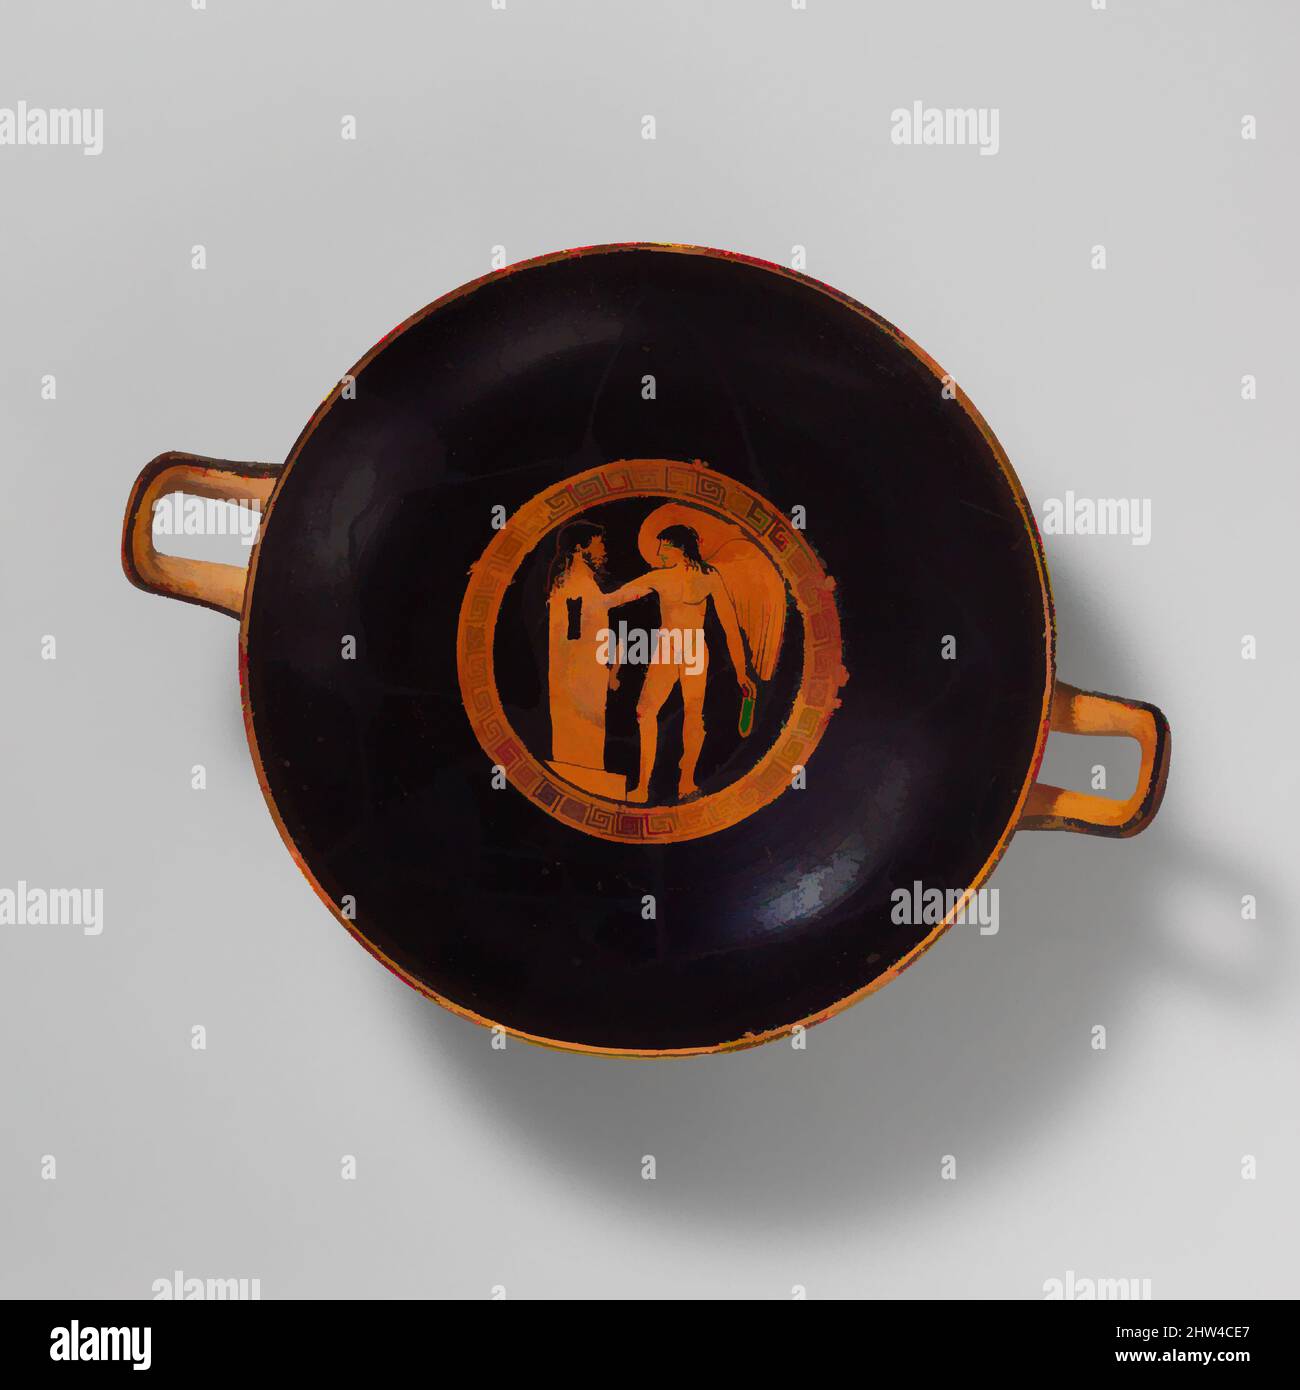 Art inspired by Terracotta kylix (drinking cup), Classical, mid-5th century B.C., Greek, Attic, Terracotta; red-figure, width 11 3/4in. (29.9cm); diameter 9in. (22.9cm), Vases, Interior, Eros at a herm, Exterior, obverse and reverse, banqueters. The earliest herms were square stone, Classic works modernized by Artotop with a splash of modernity. Shapes, color and value, eye-catching visual impact on art. Emotions through freedom of artworks in a contemporary way. A timeless message pursuing a wildly creative new direction. Artists turning to the digital medium and creating the Artotop NFT Stock Photo